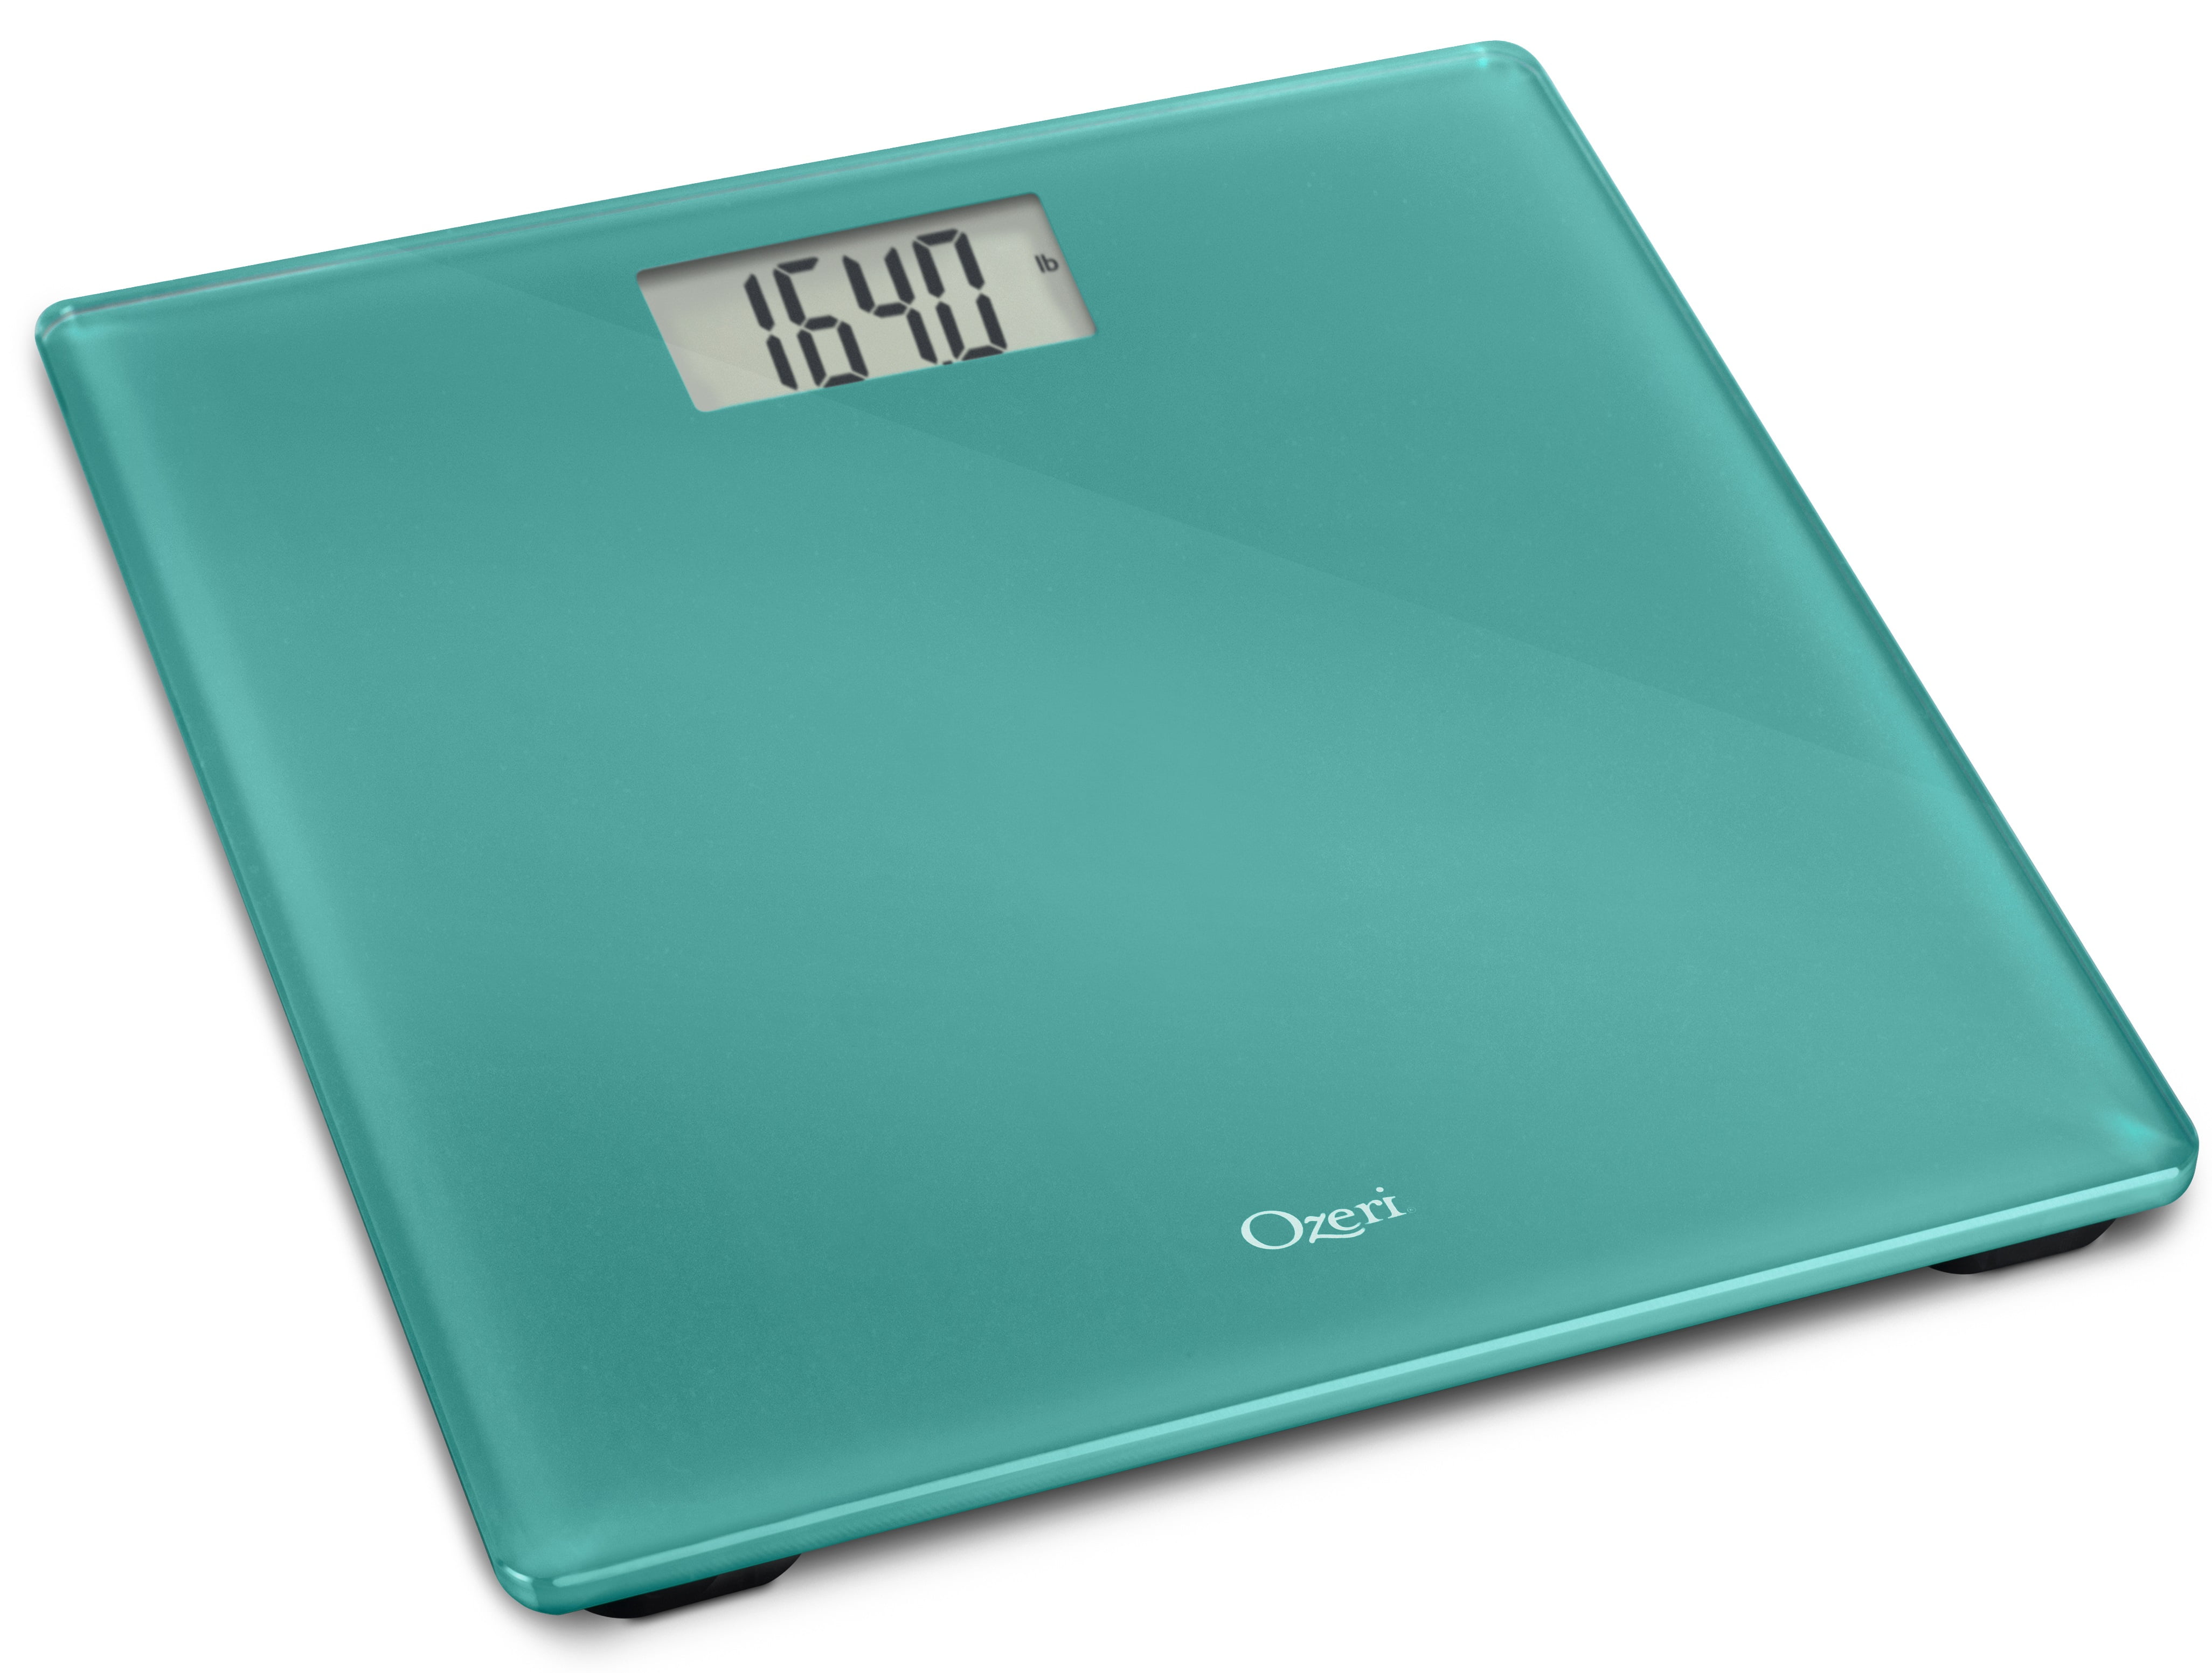 Step up to Scale Back with fabulous new bathroom scales 